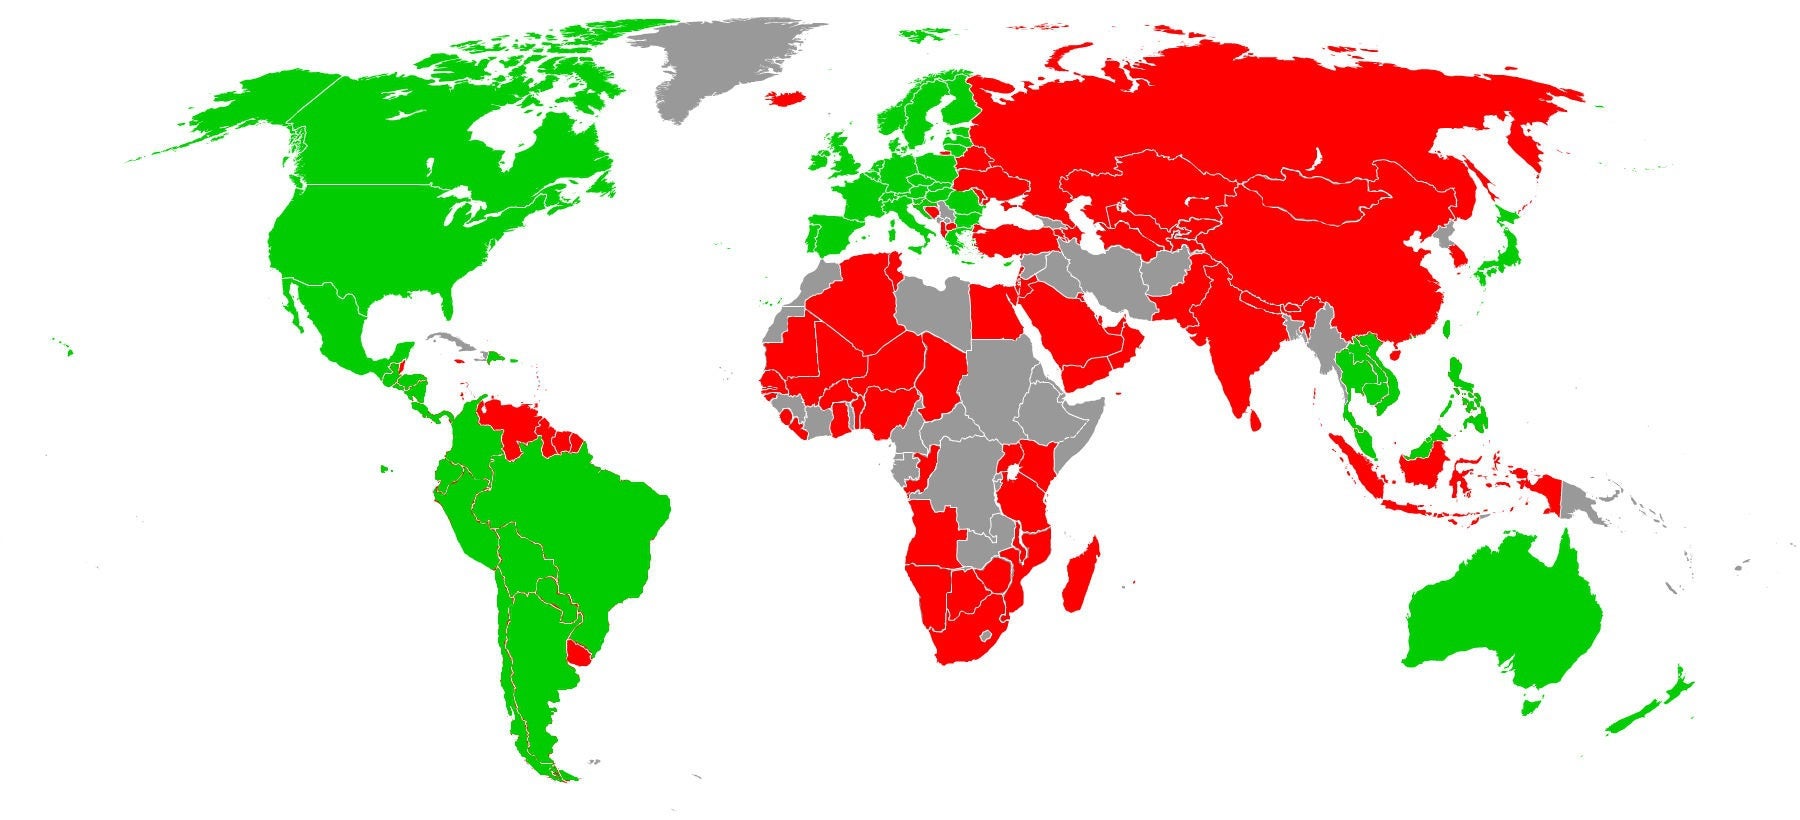 In green, countries where everything is available, in red - only limited parts of iTunes. - Apple&#039;s mini tablet could be a haven for international media consumption